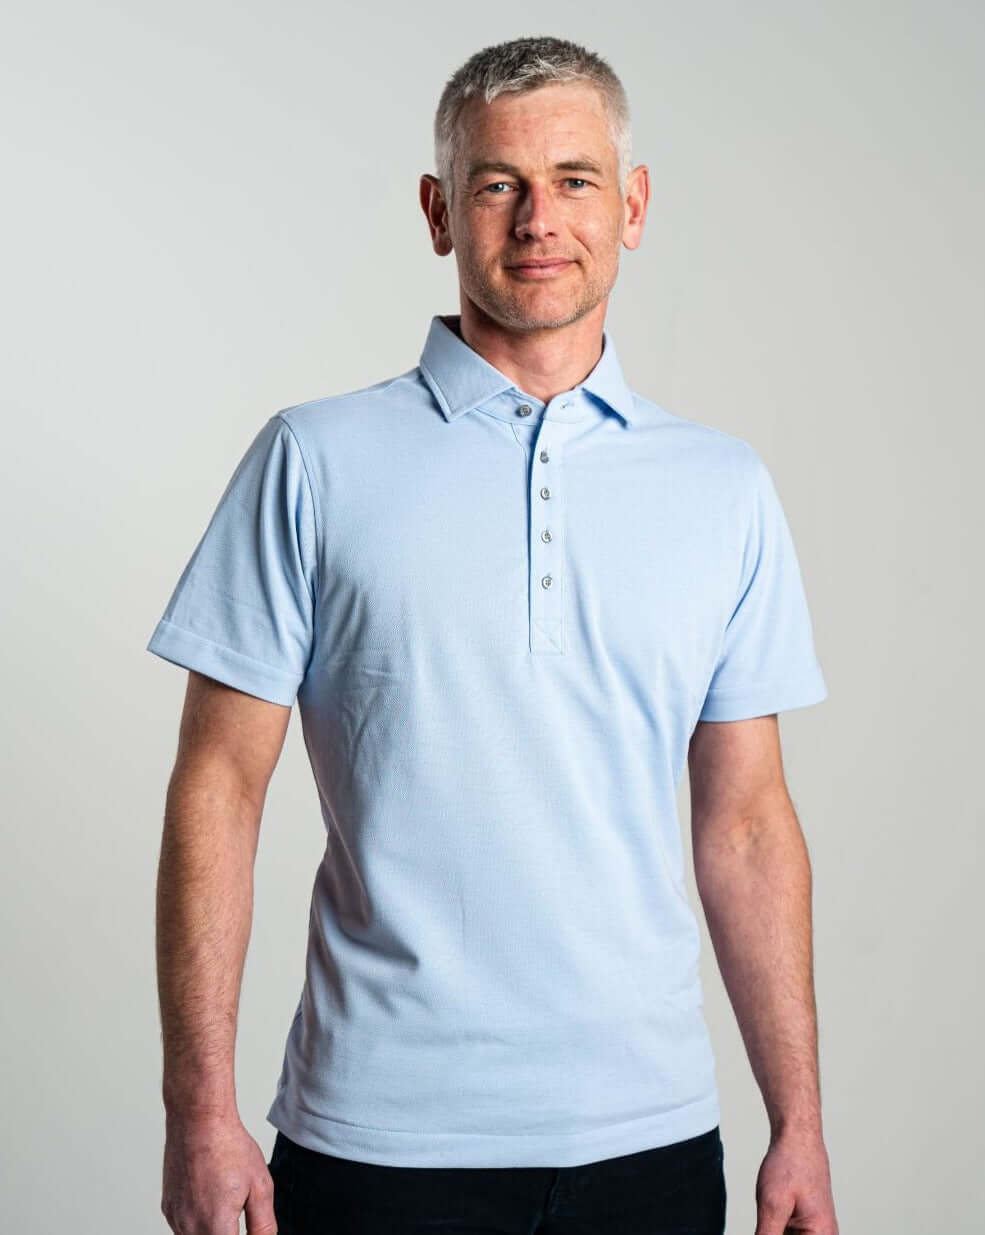 No Sweat Polo Shirt Sky Blue, Sweat Proof, Anti-Odor, Stain Repellent, Sweat-wicking